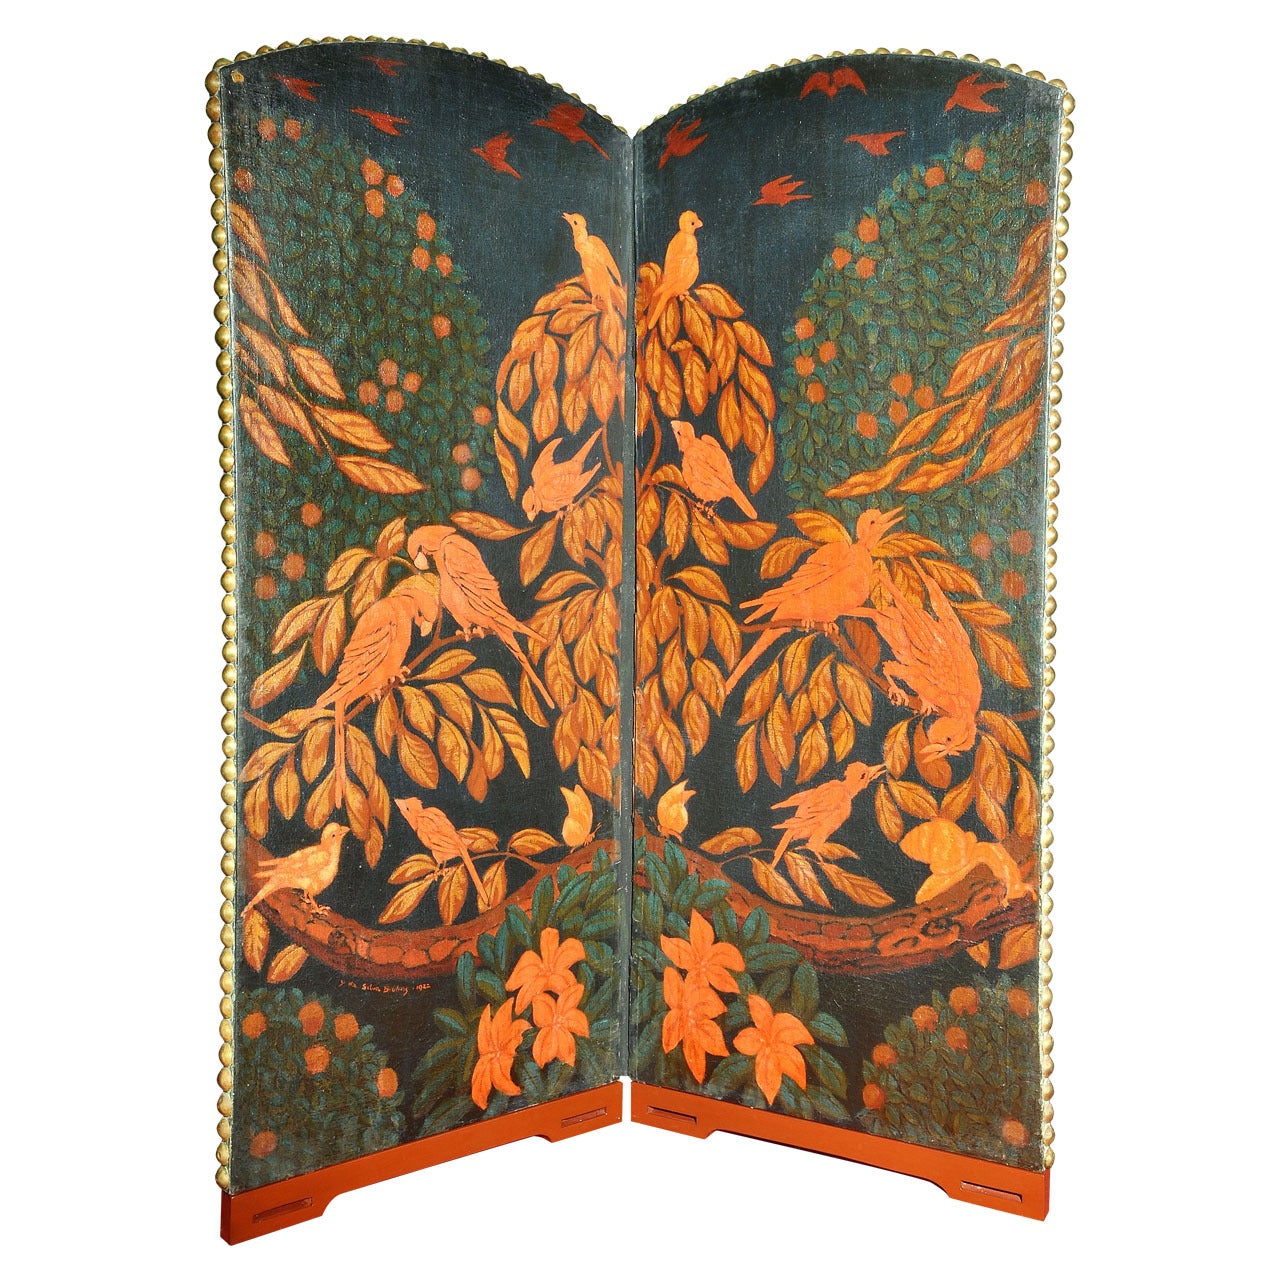 Unique Yvan Da Silva Bruhns Signed and Dated 1922 Folding Screen For Sale